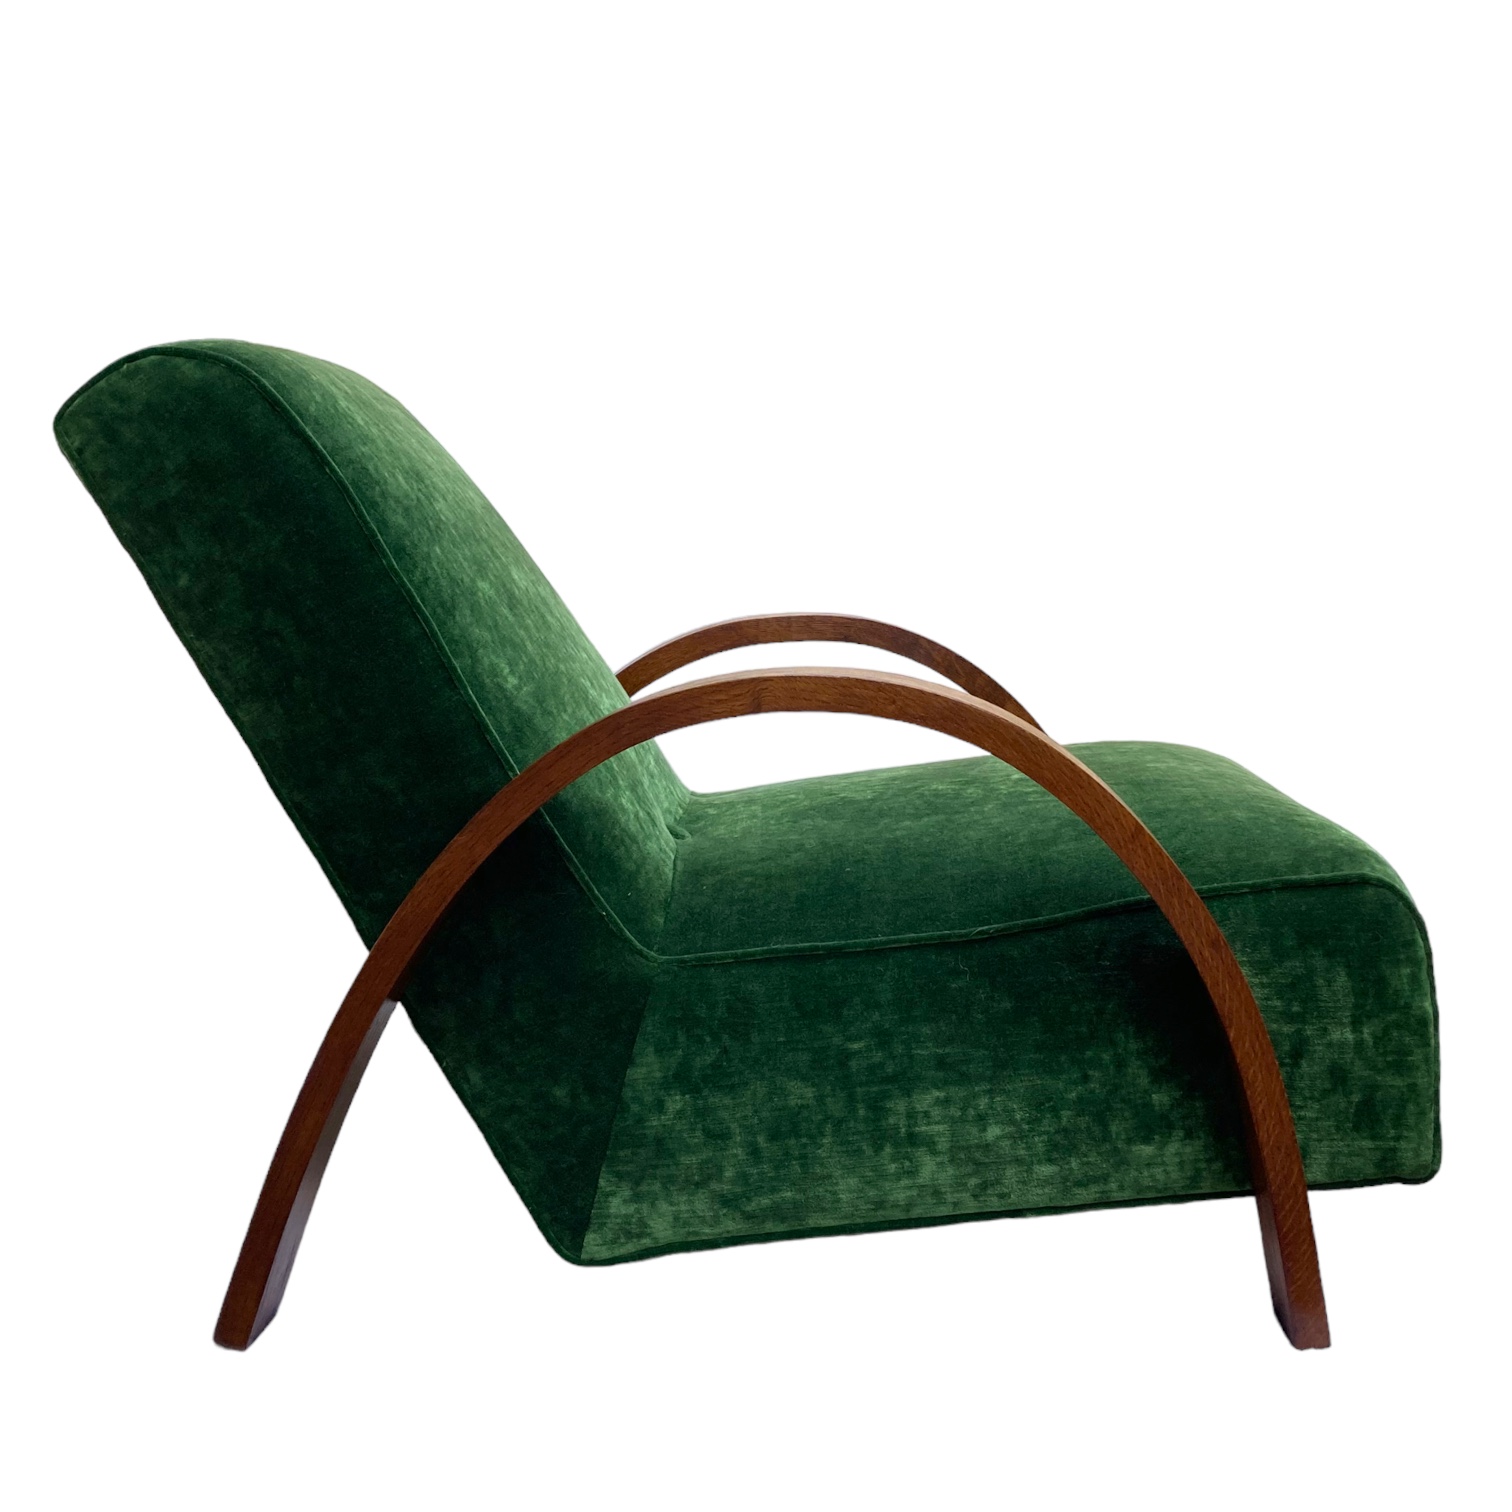 Art Deco Modernist Oak Bentwood Armchair By Heals Of London Fully Restored And Upholstered In Sumptuous Velvet By Linwood